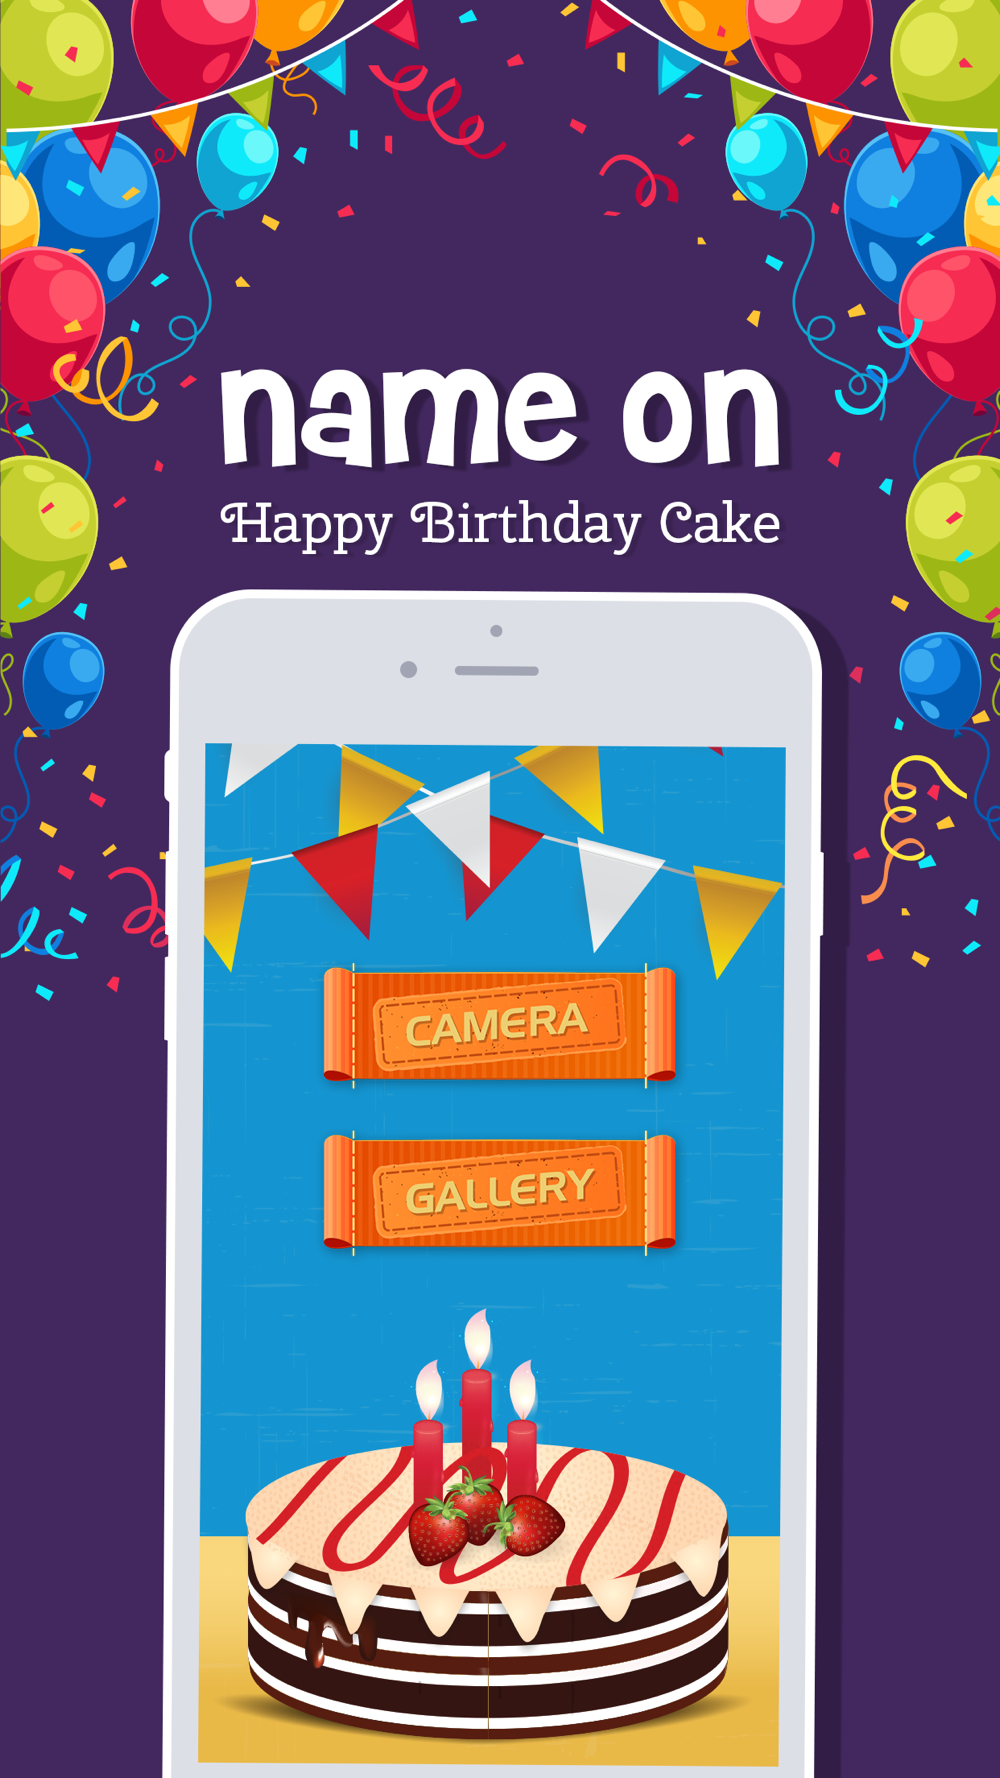 Name On Happy Birthday Cake Free Download App For Iphone Steprimo Com